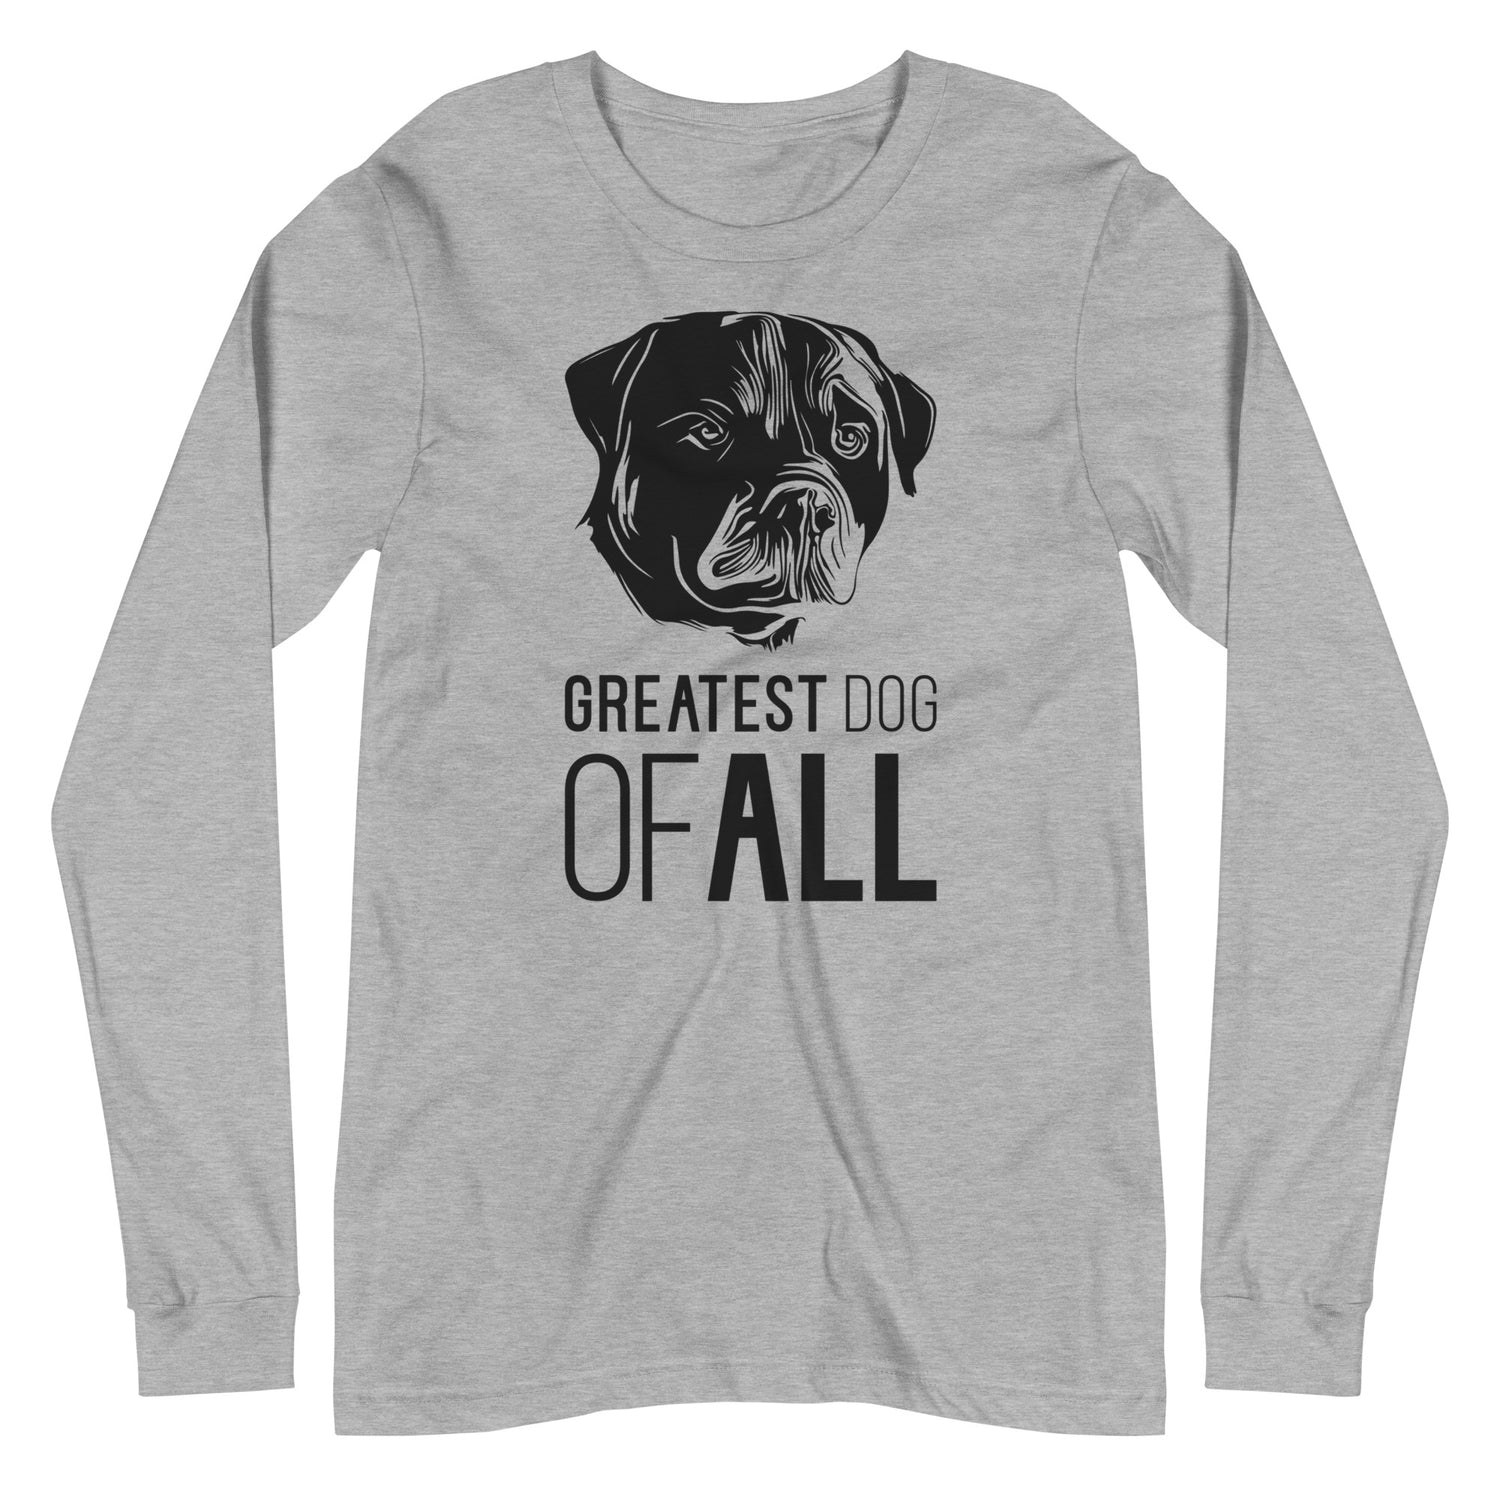 Black Rottweiler face silhouette with Greatest Dog of All caption on unisex athletic heather long sleeve t-shirt